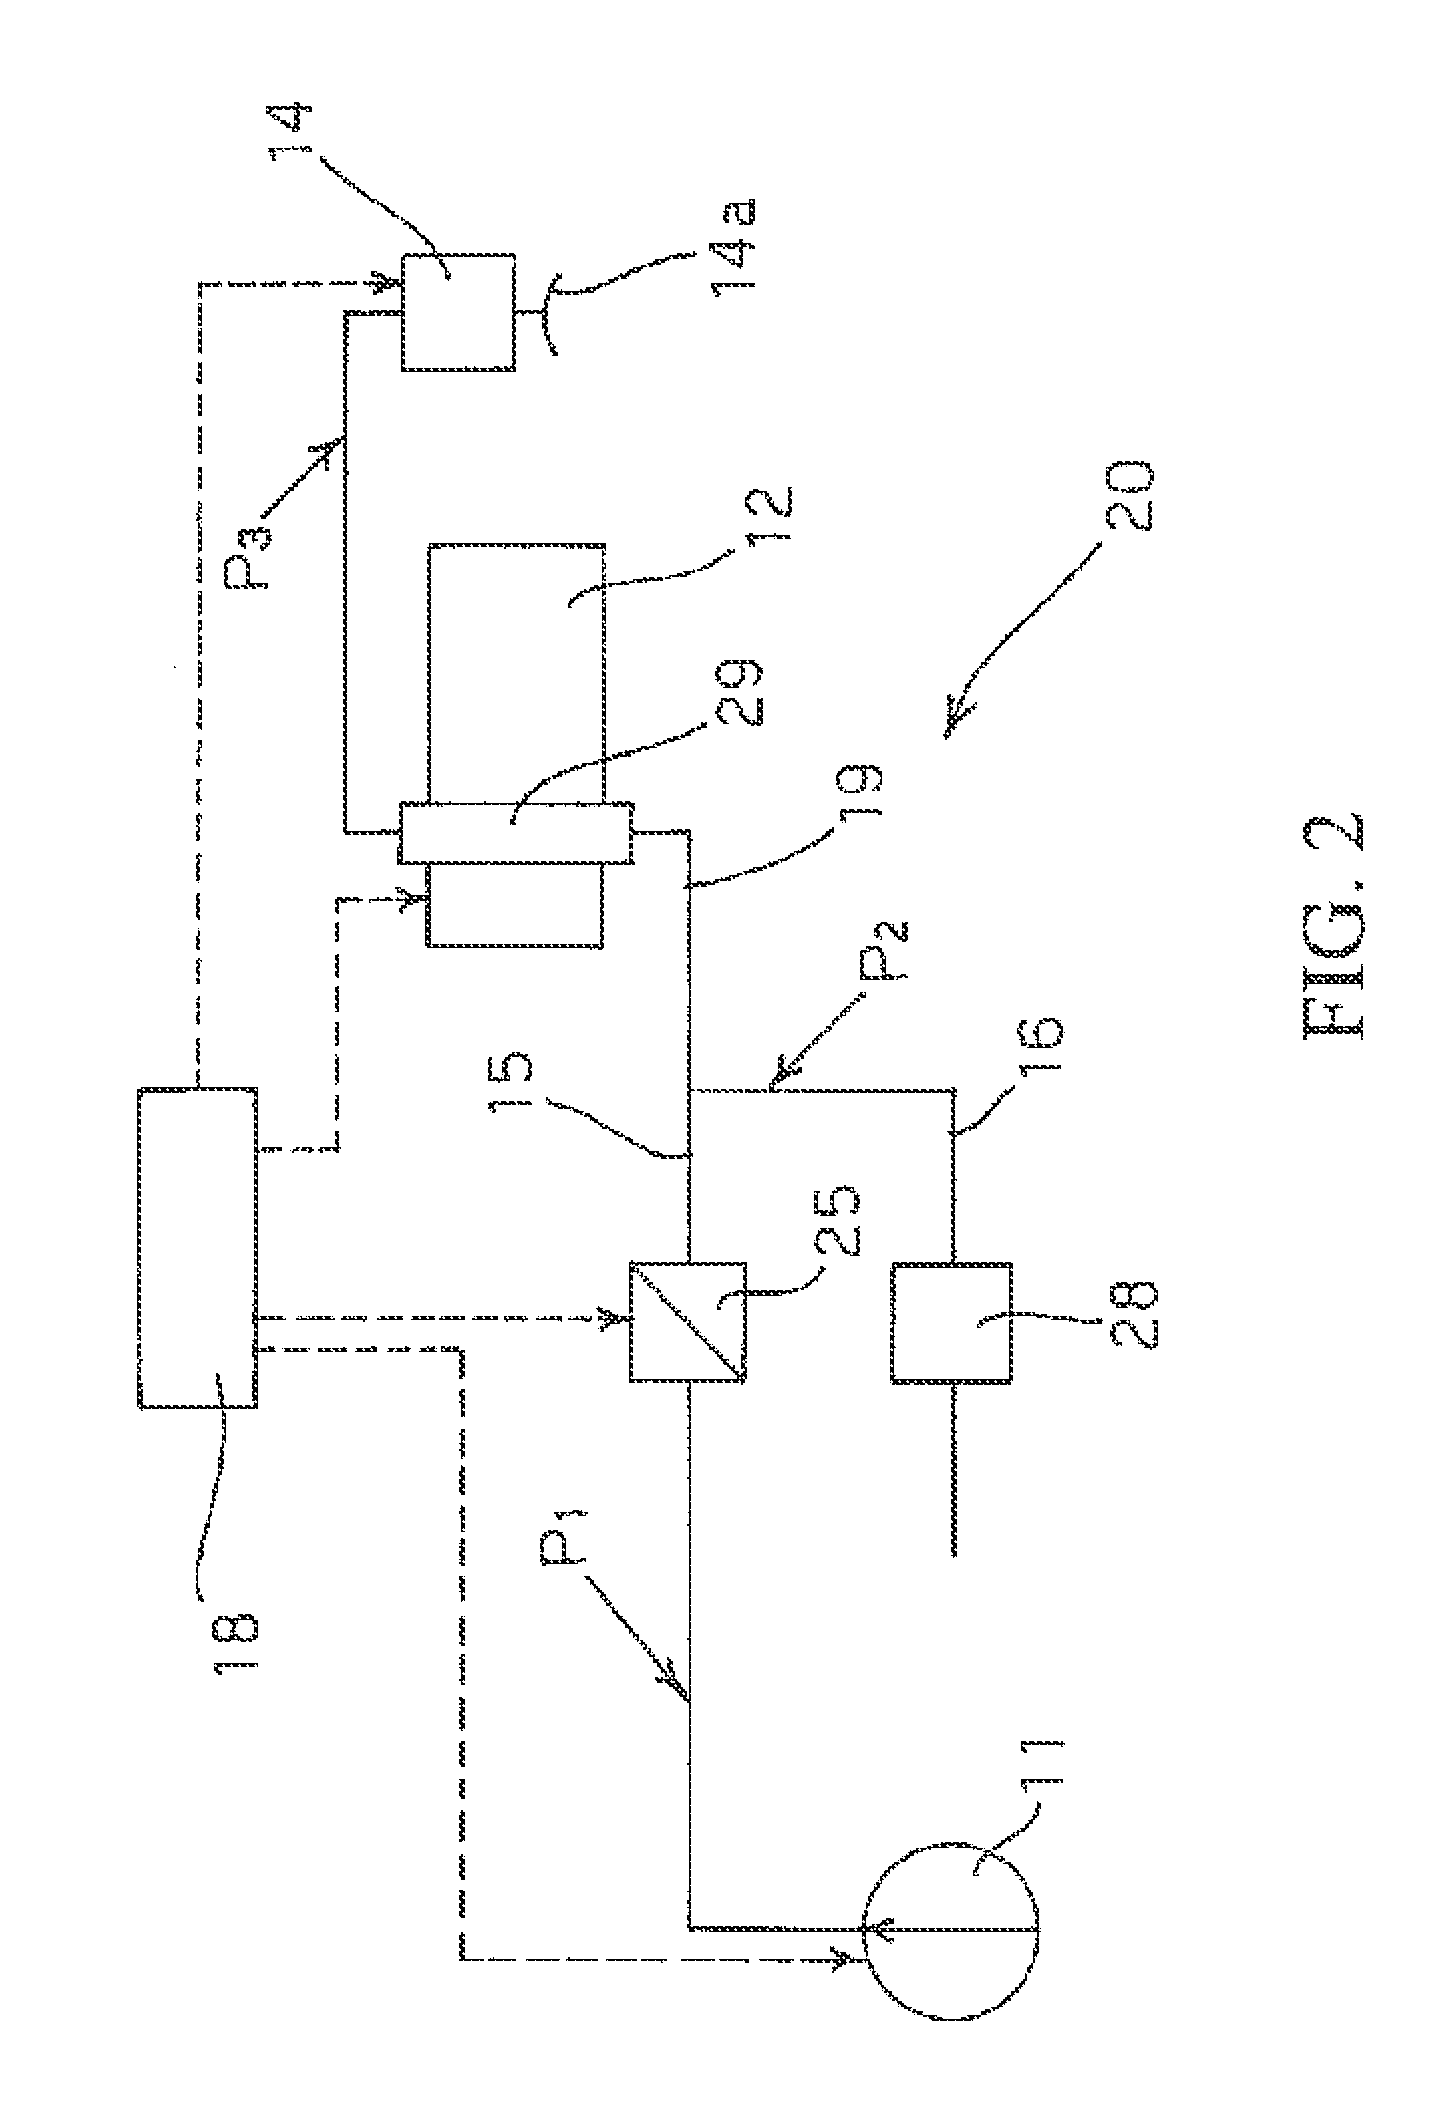 Method of preparing coffee infusions and machine for achieving same